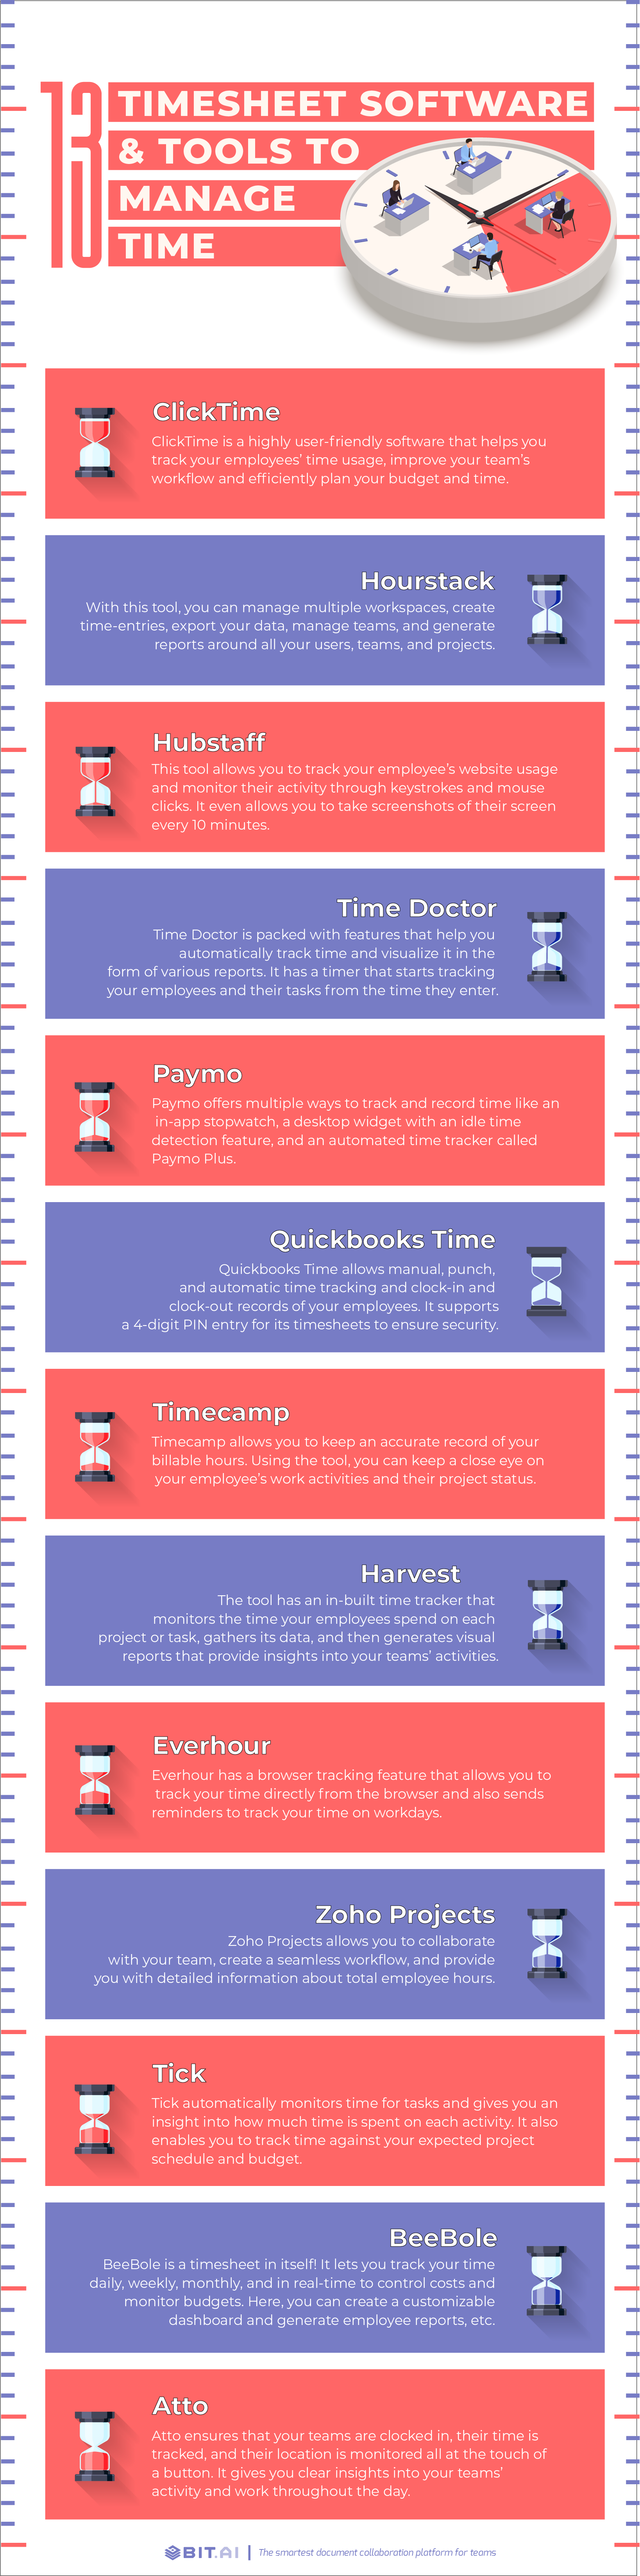 Timesheet software and tools infographic